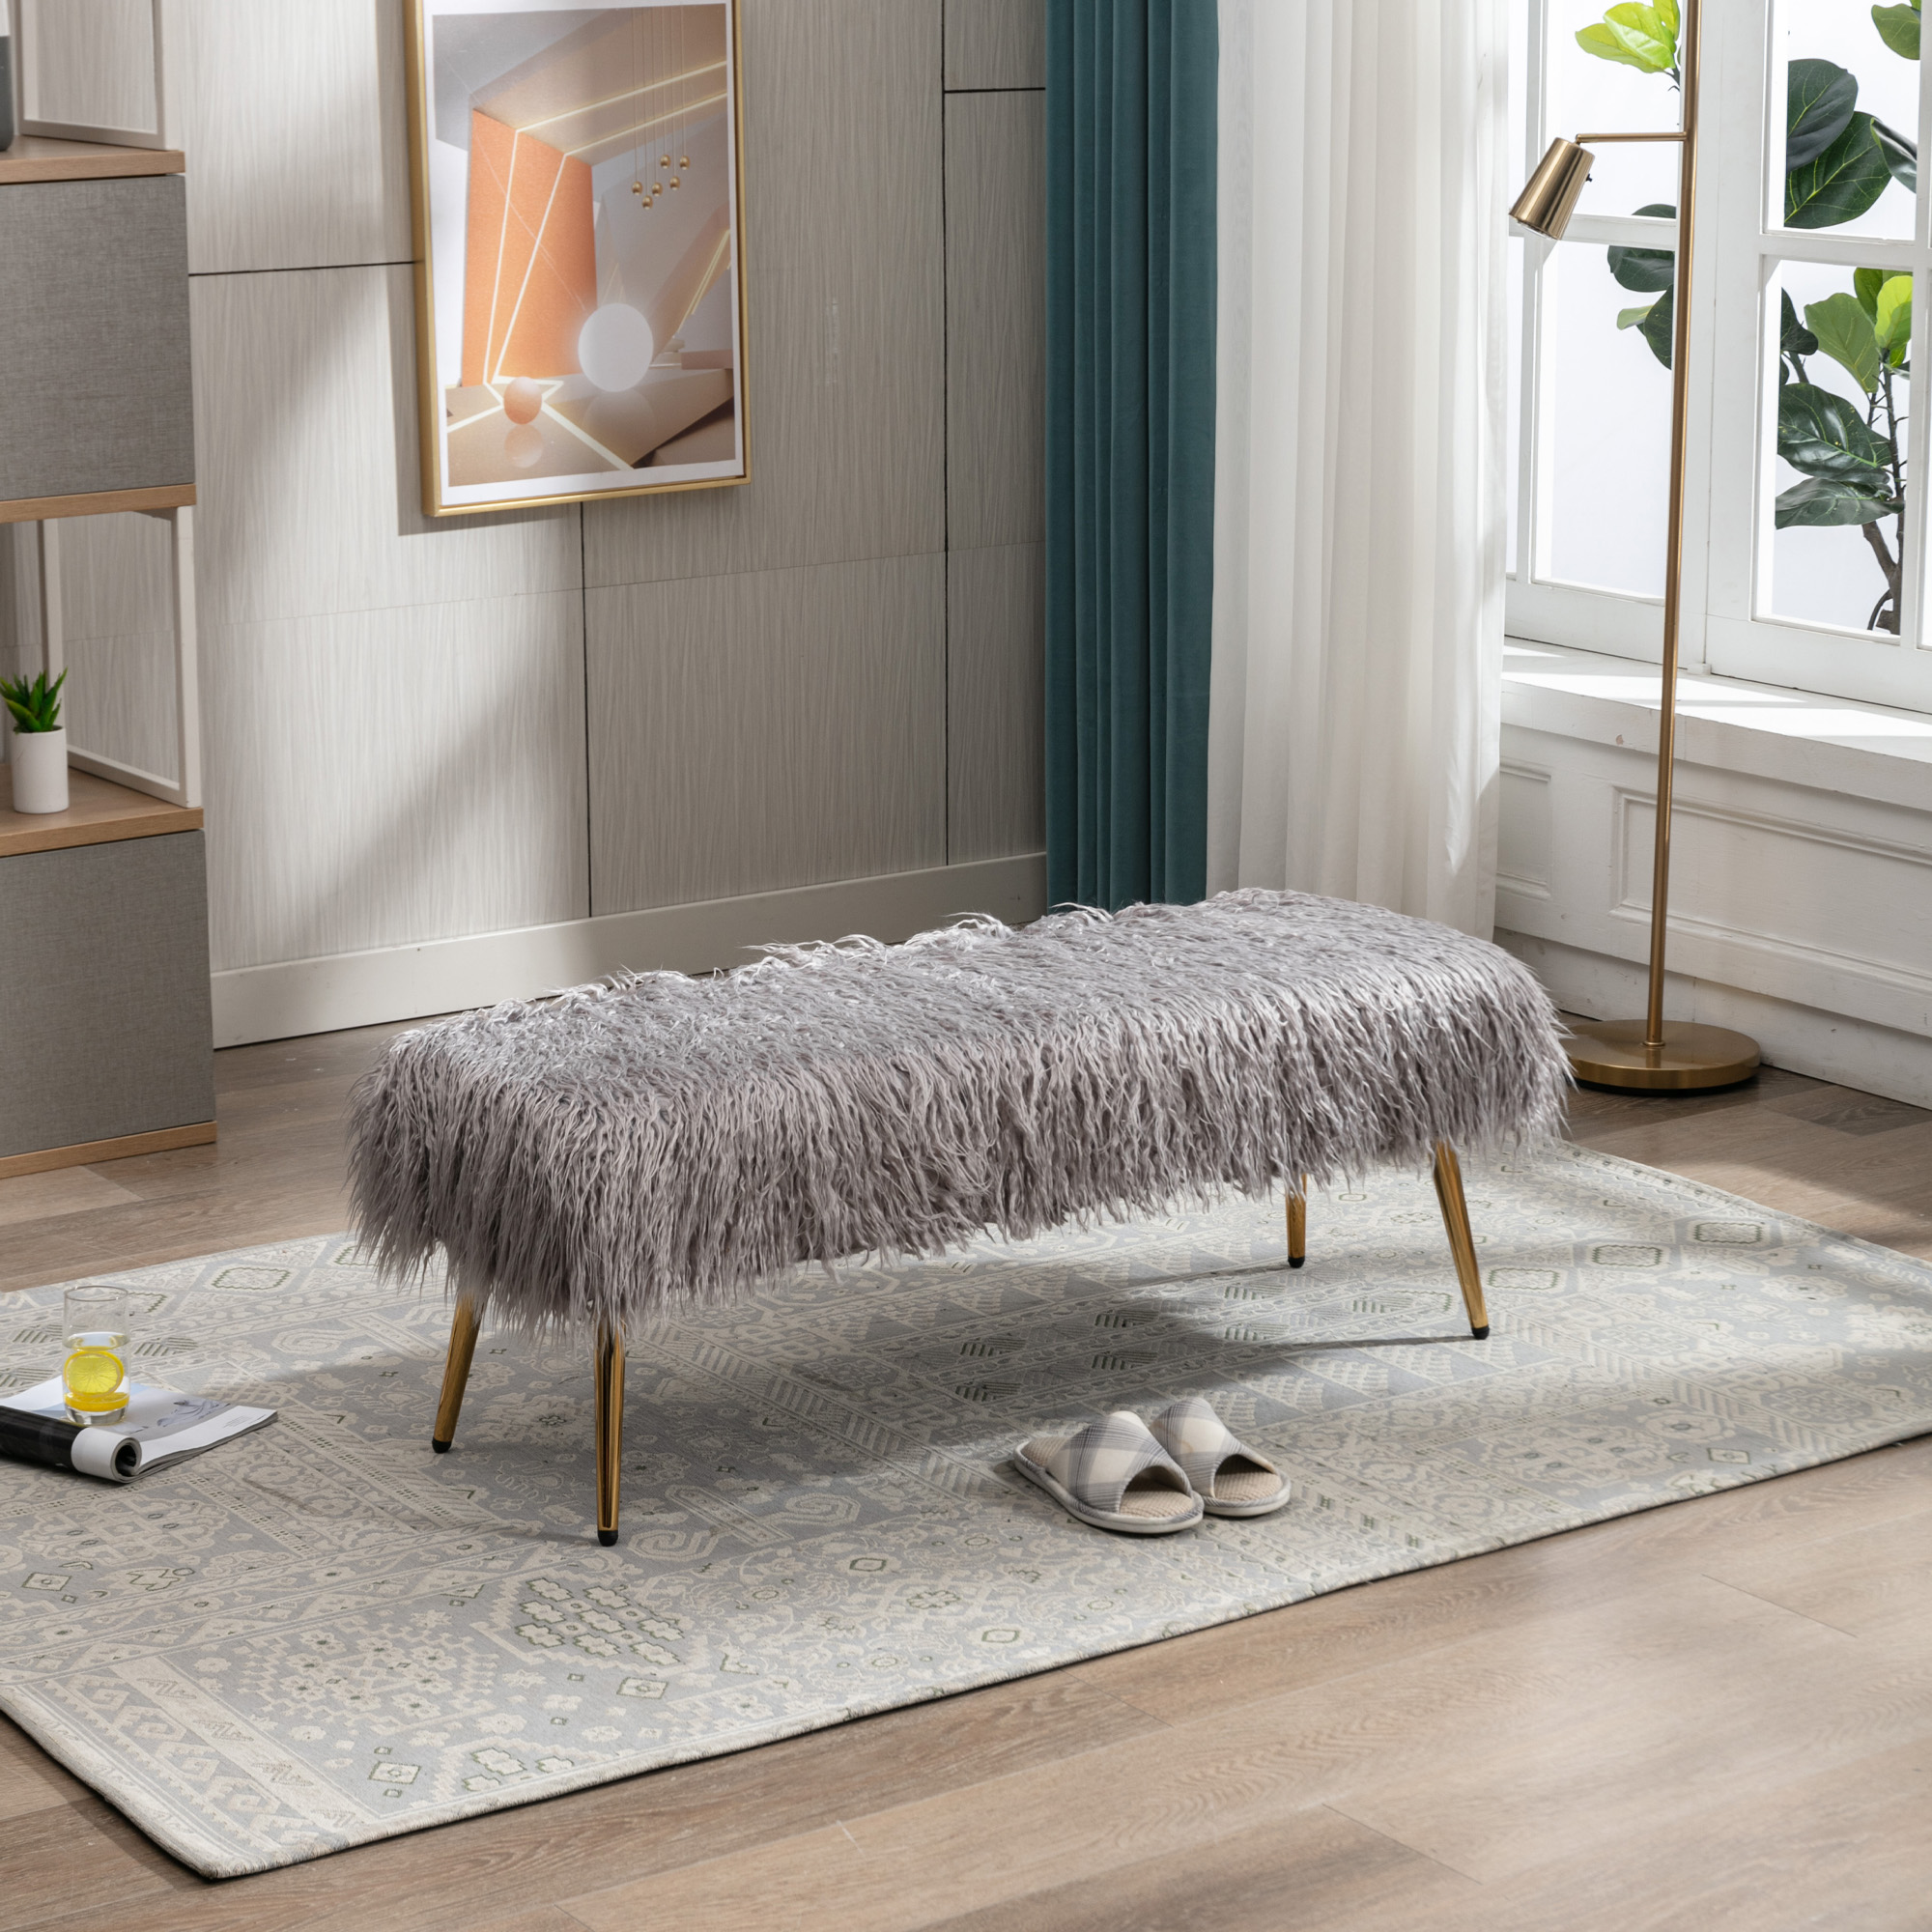 HengMing Faux Fur Plush Ottoman Bench, Modern Fluffy Upholstered Bench for Entryway Dining Room Living Room Bedroom, GRAY